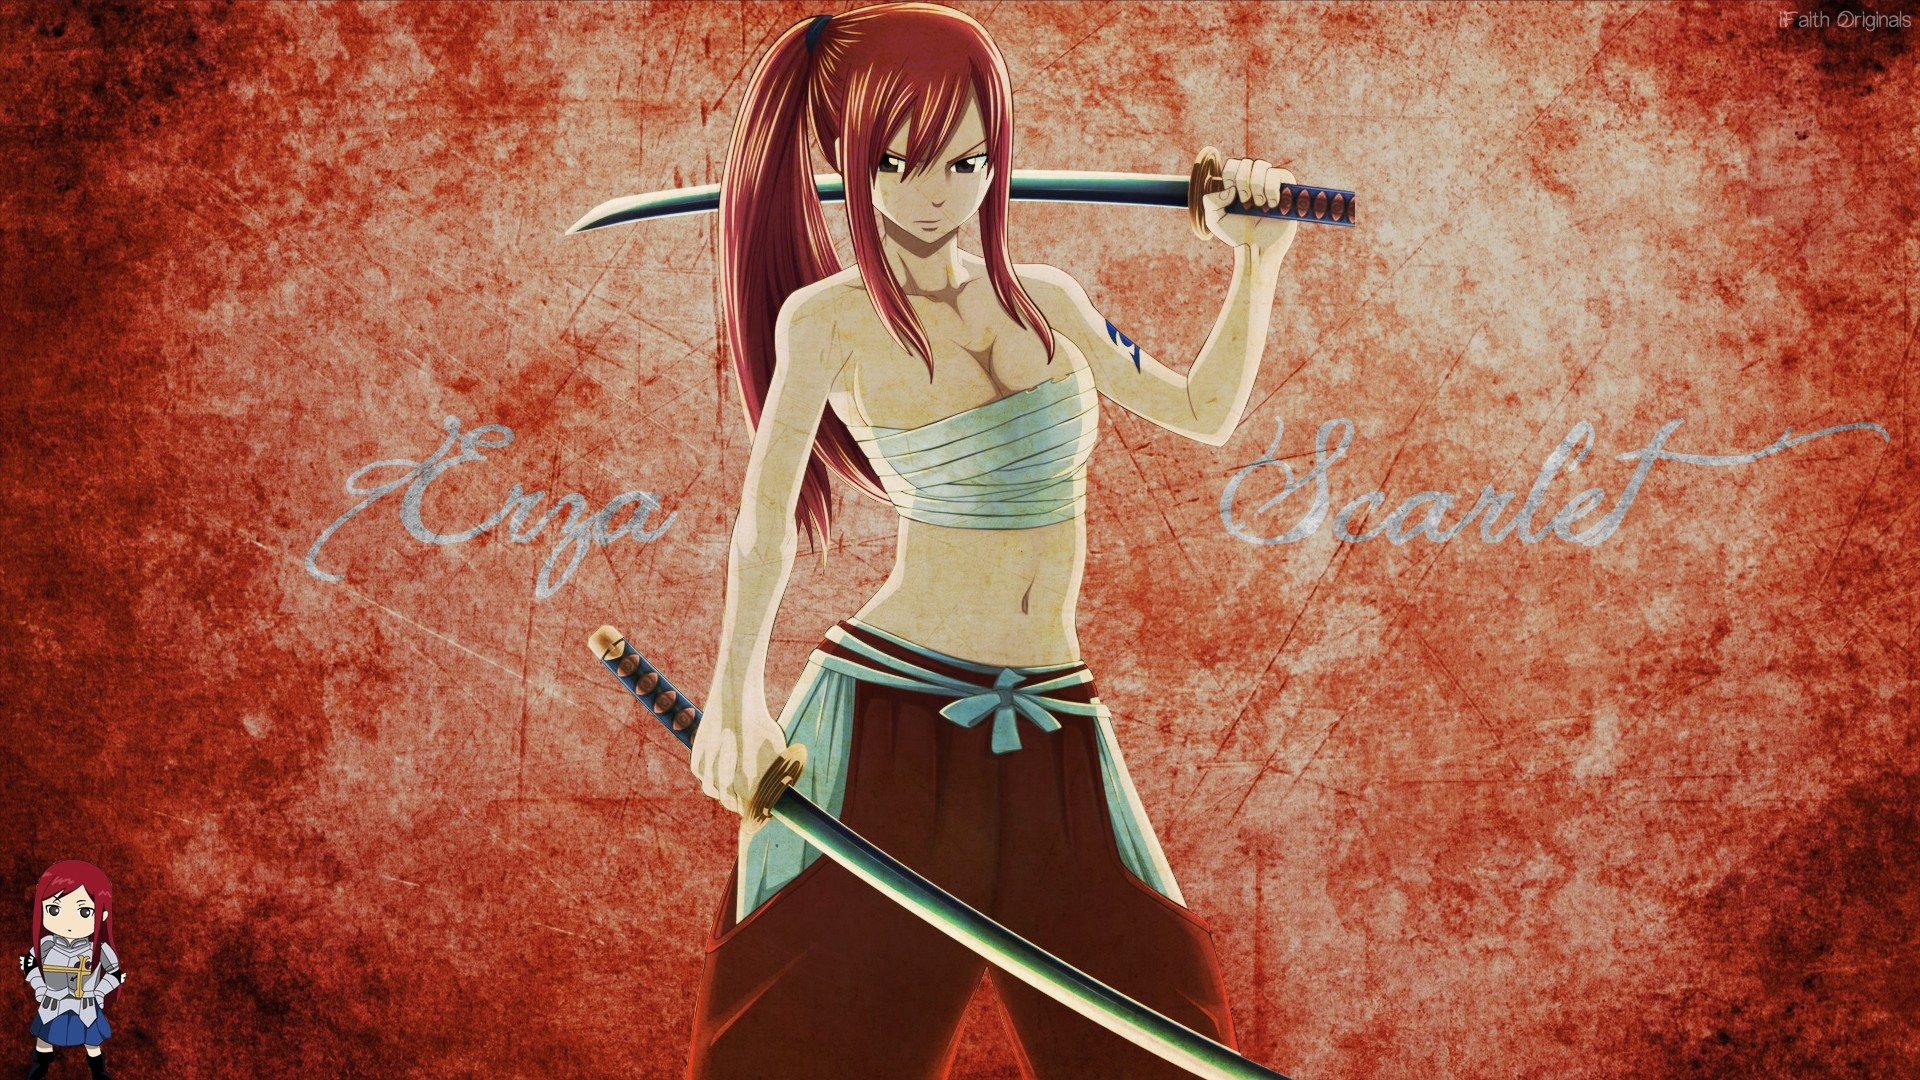 1920x1080 Fairy Tail Erza Wallpaper For Android ~ Sdeerwallpaper